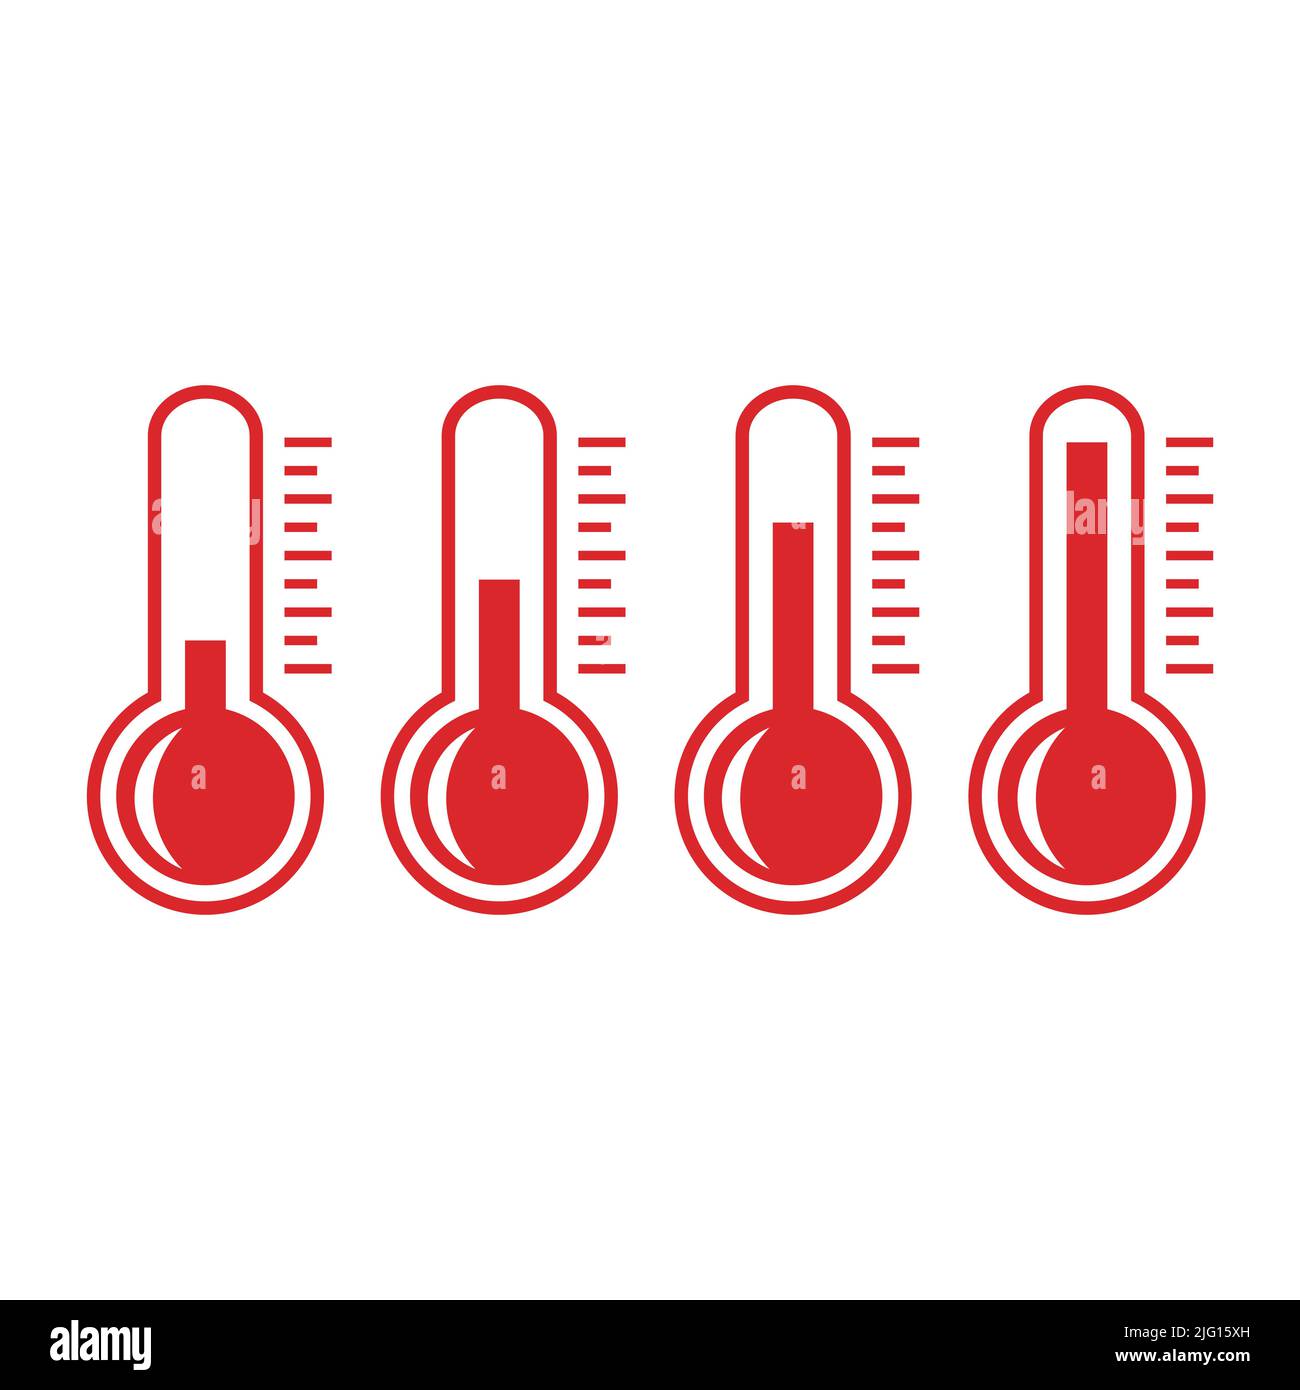 https://c8.alamy.com/comp/2JG15XH/thermometer-vector-icon-cold-weather-thermometer-icon-2JG15XH.jpg